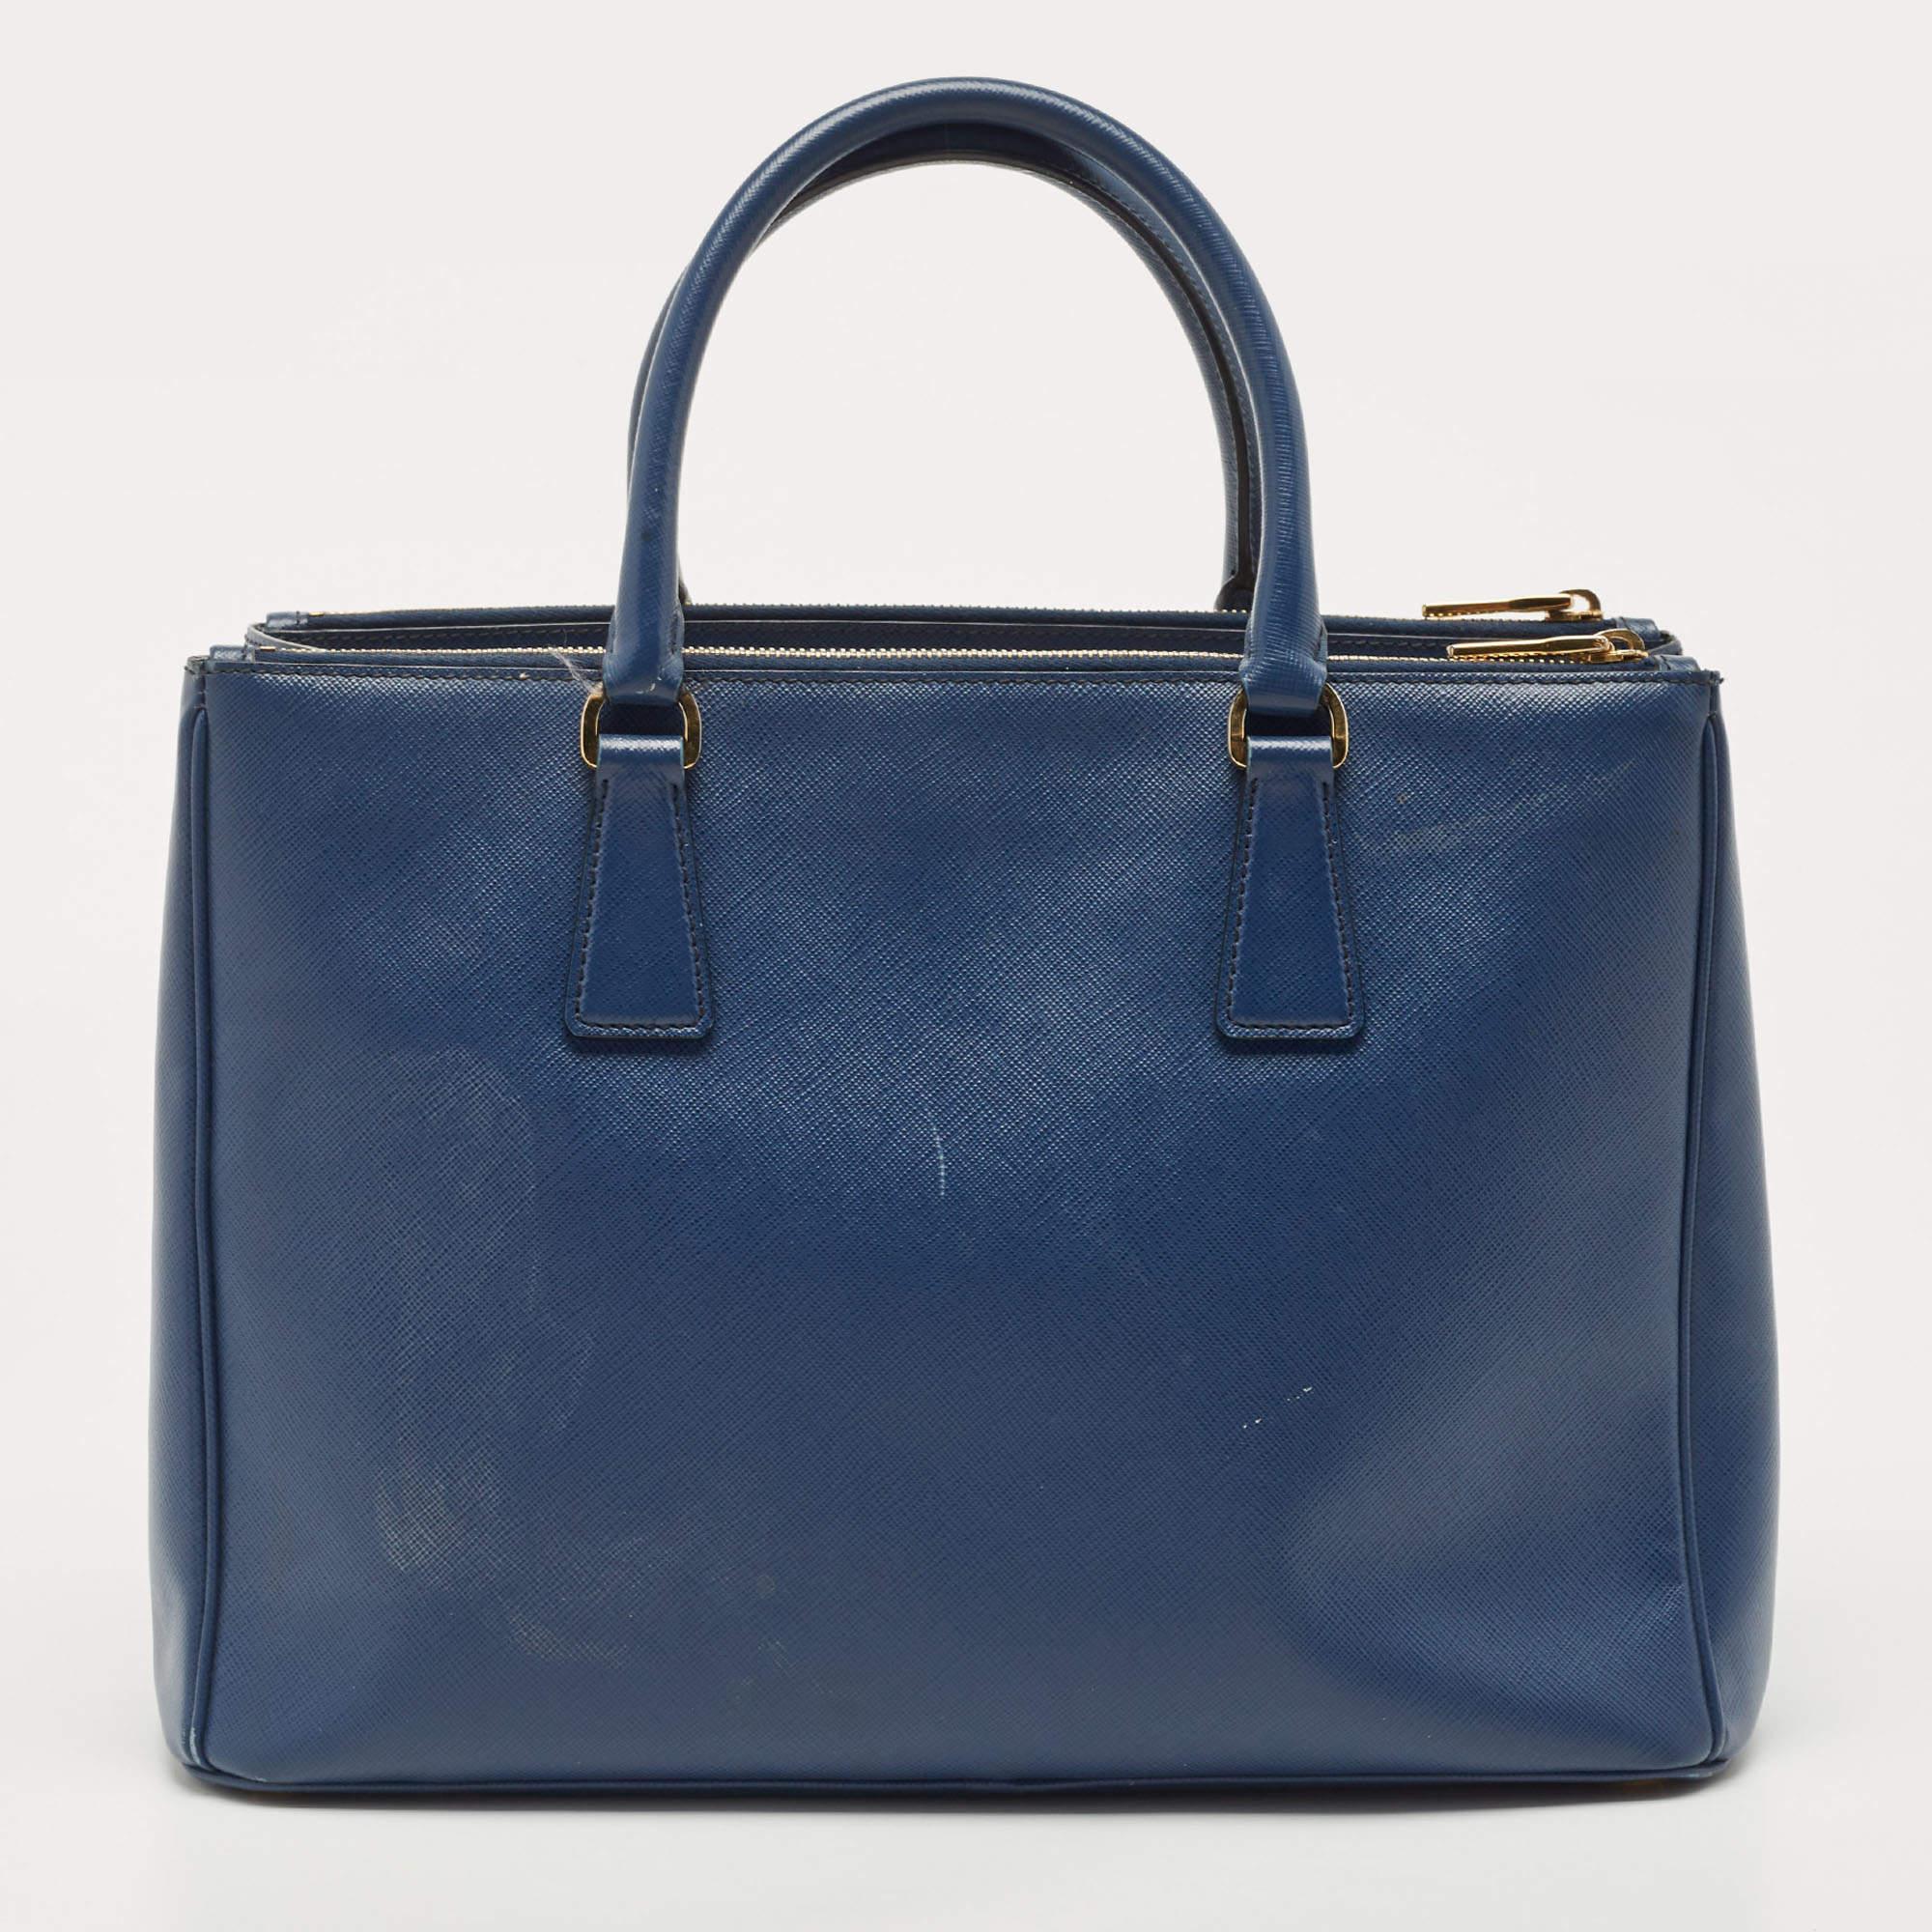 Feminine in shape and grand in design, this Double Zip tote by Prada will be a valuable addition to your closet. It has been crafted from Saffiano lux leather and styled minimally with gold-tone hardware. It comes with dual handles at the top, two